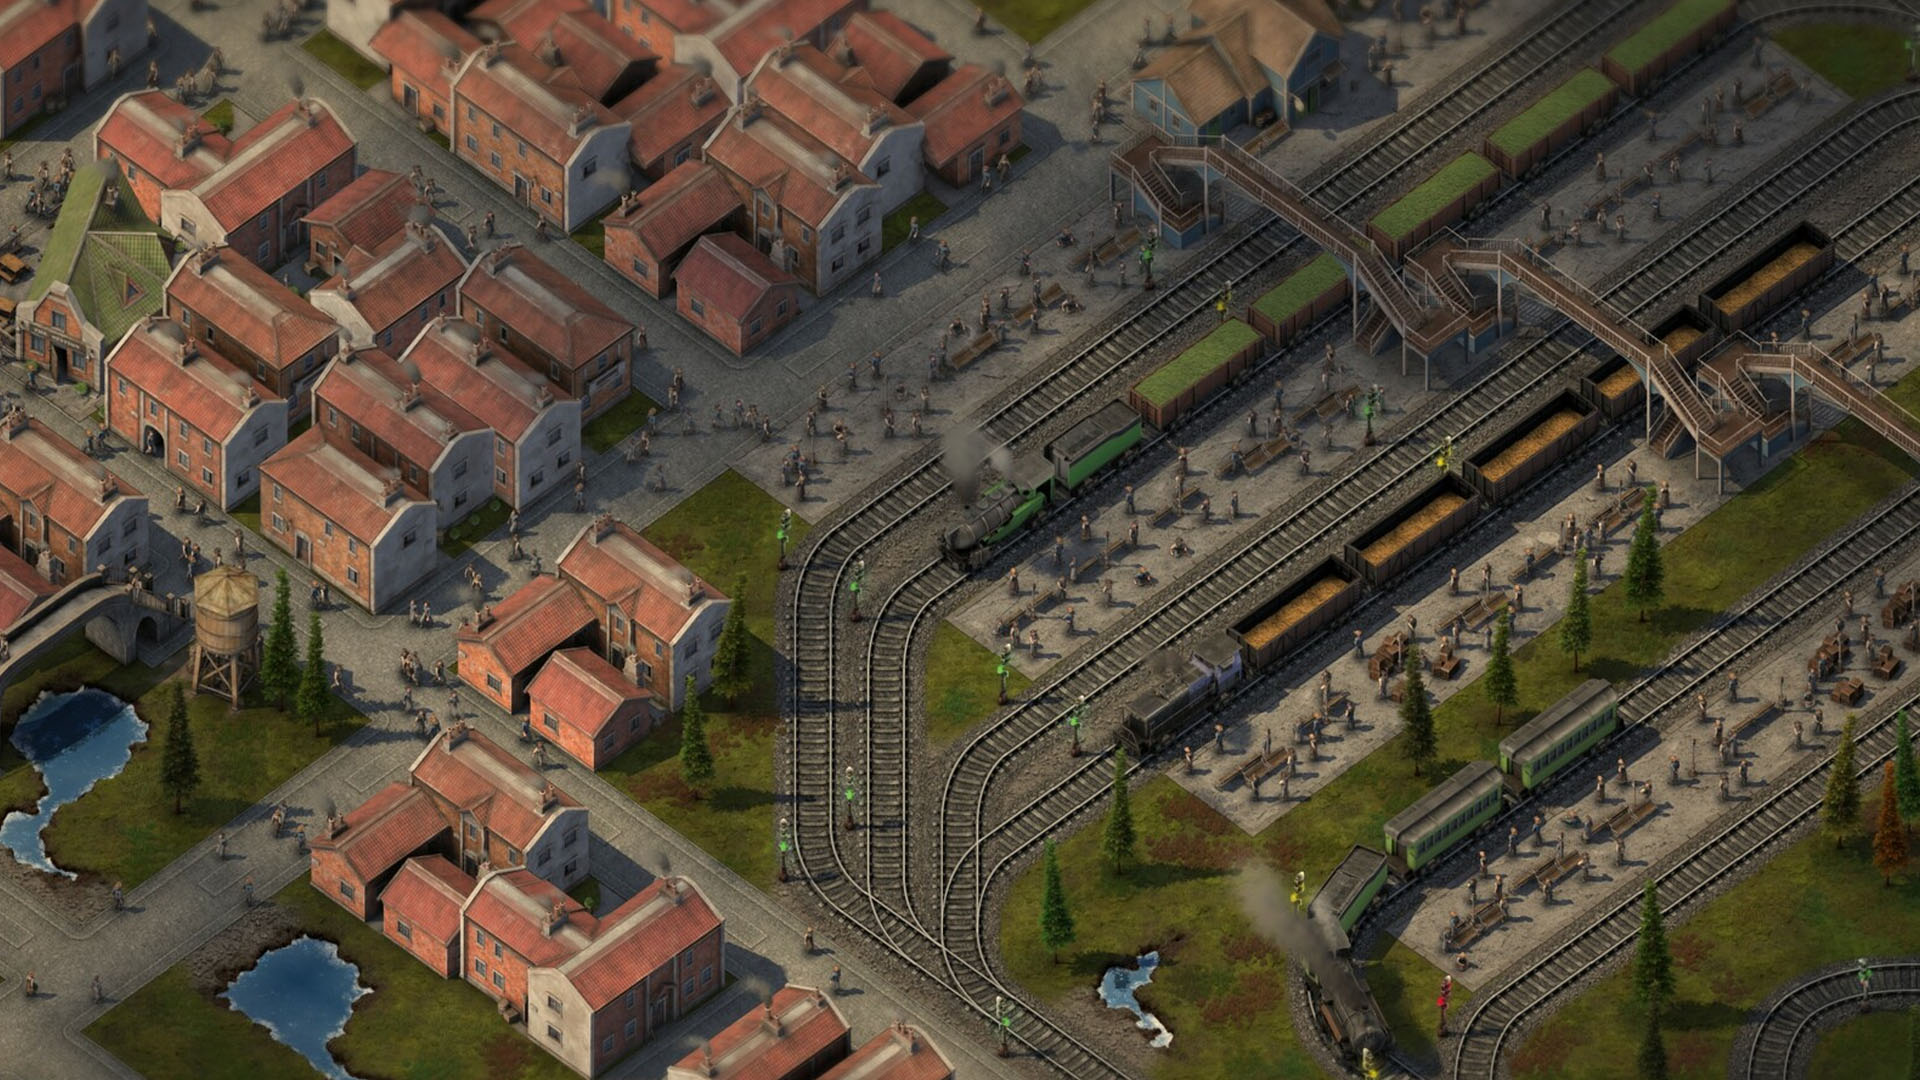 Factorio and trains are finally together in city builder coming soon